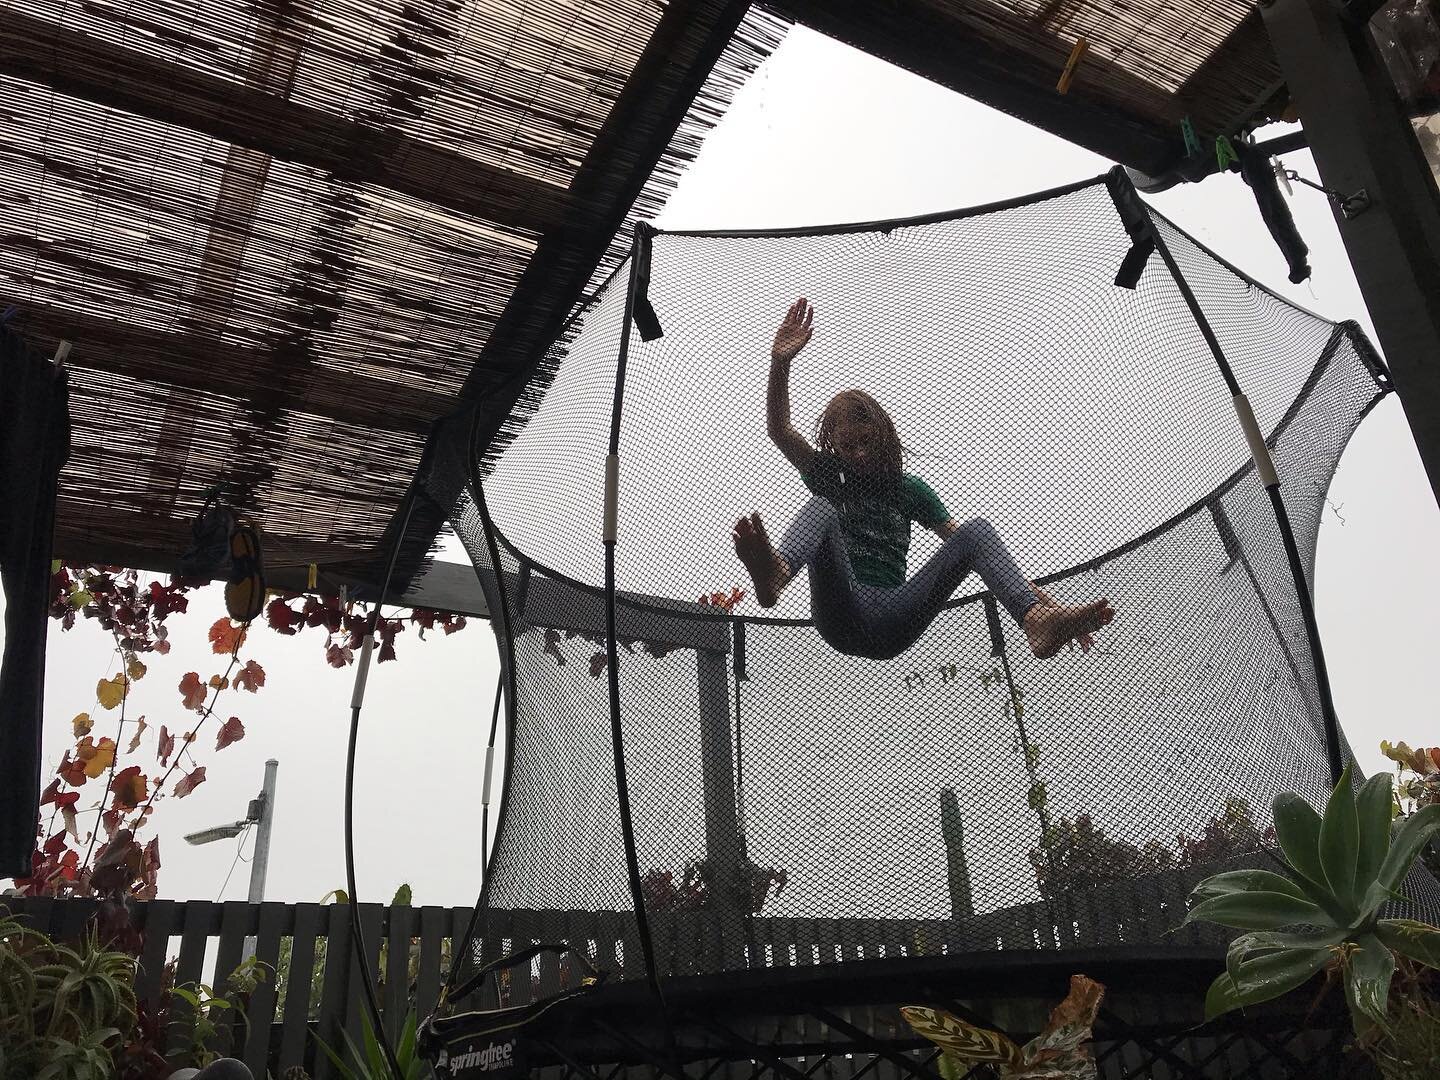 Jumping in the rain.